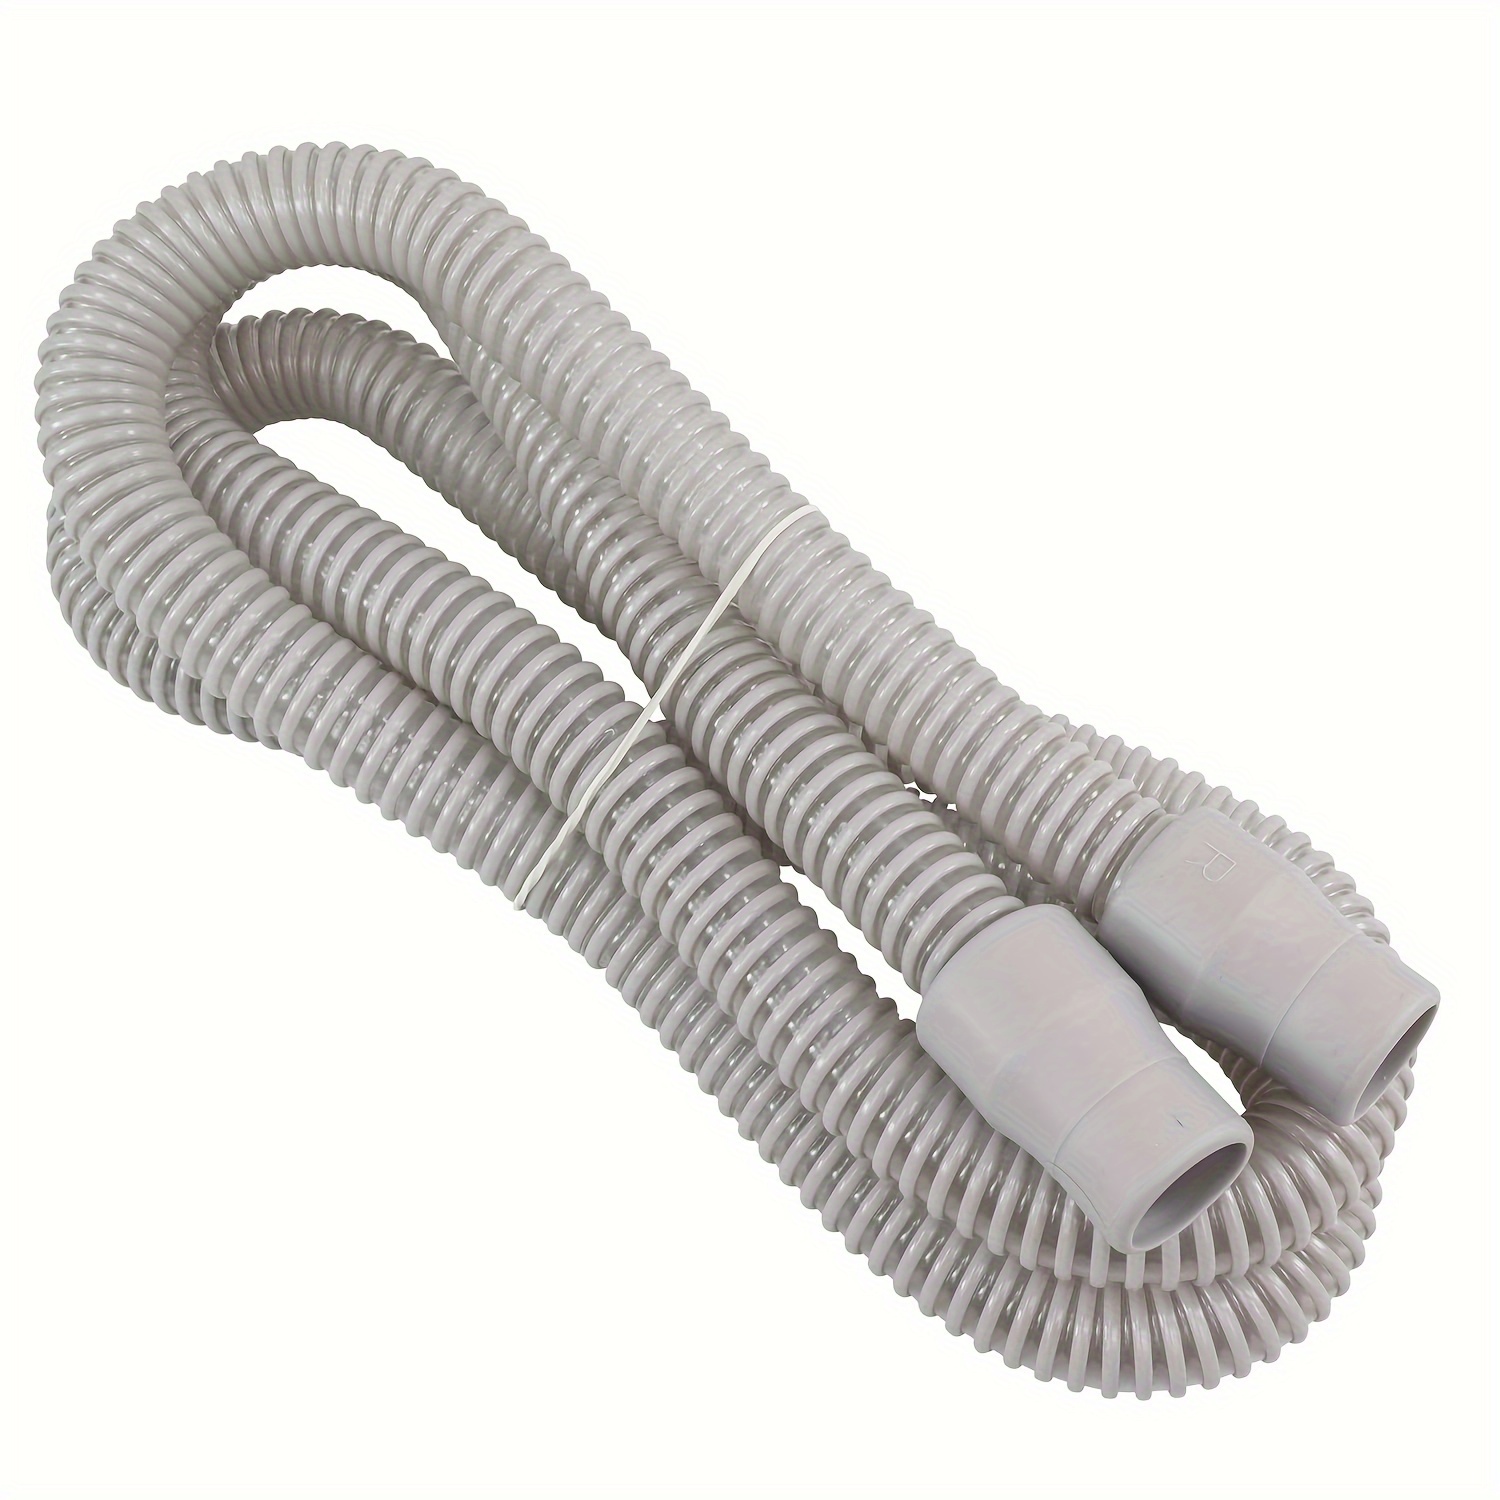 

1pc Replaceable Cpap Hose 1.8 Meters Long 22mm Diameter, Universal Type Household Respirator Mask Special Pipeline Circuit, Adaptable To Most Respirators On The Market